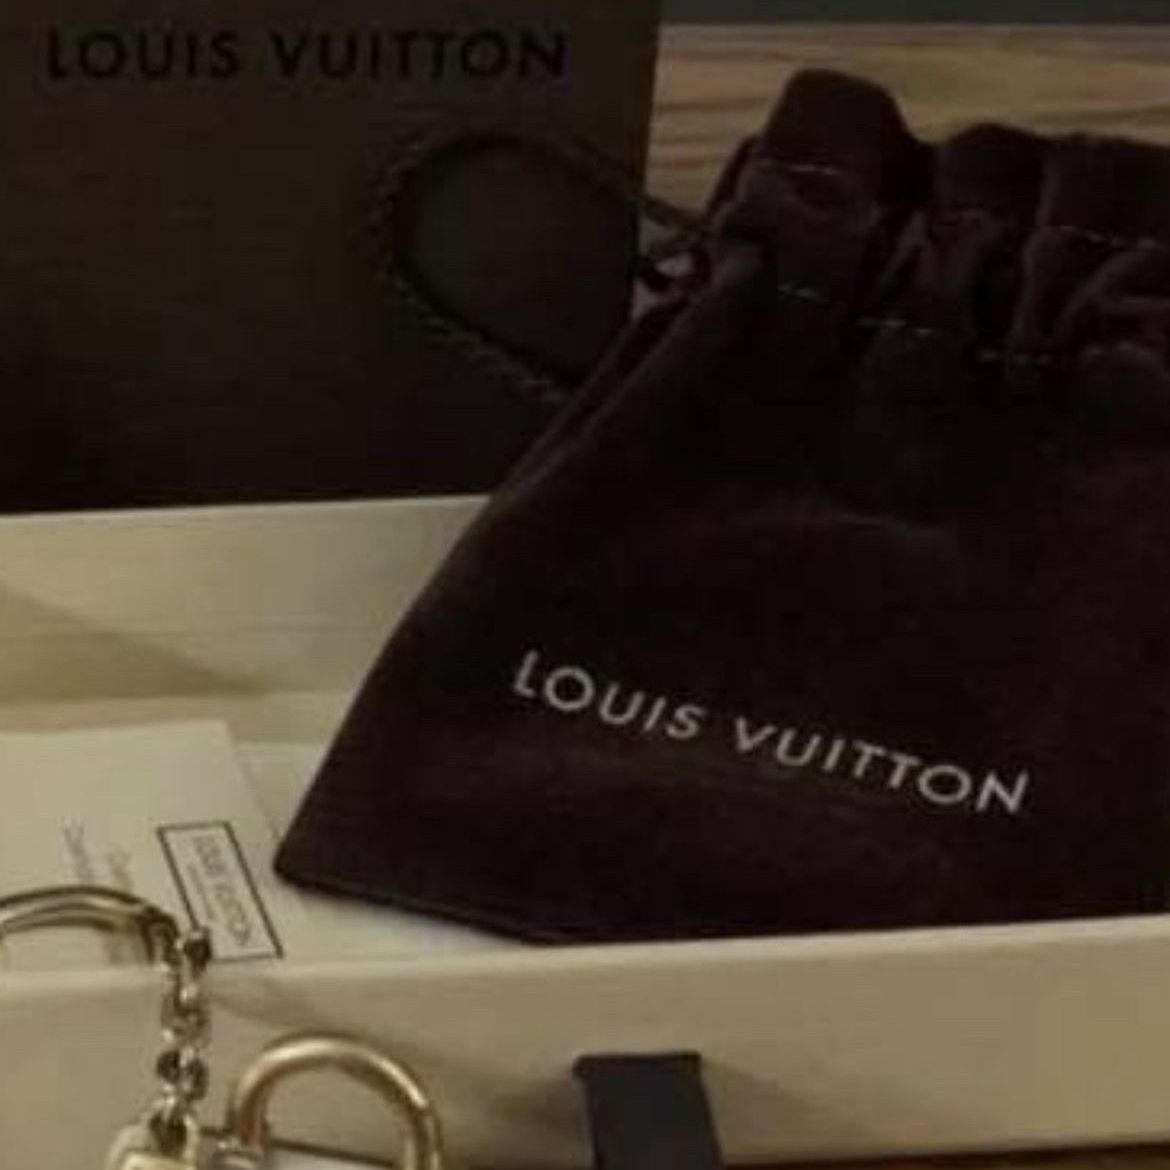 LOUIS VUITTON Porte Cles Speedy inclusion White Bag Charm Key Ring Keychain  for Sale in New Milford, NJ - OfferUp